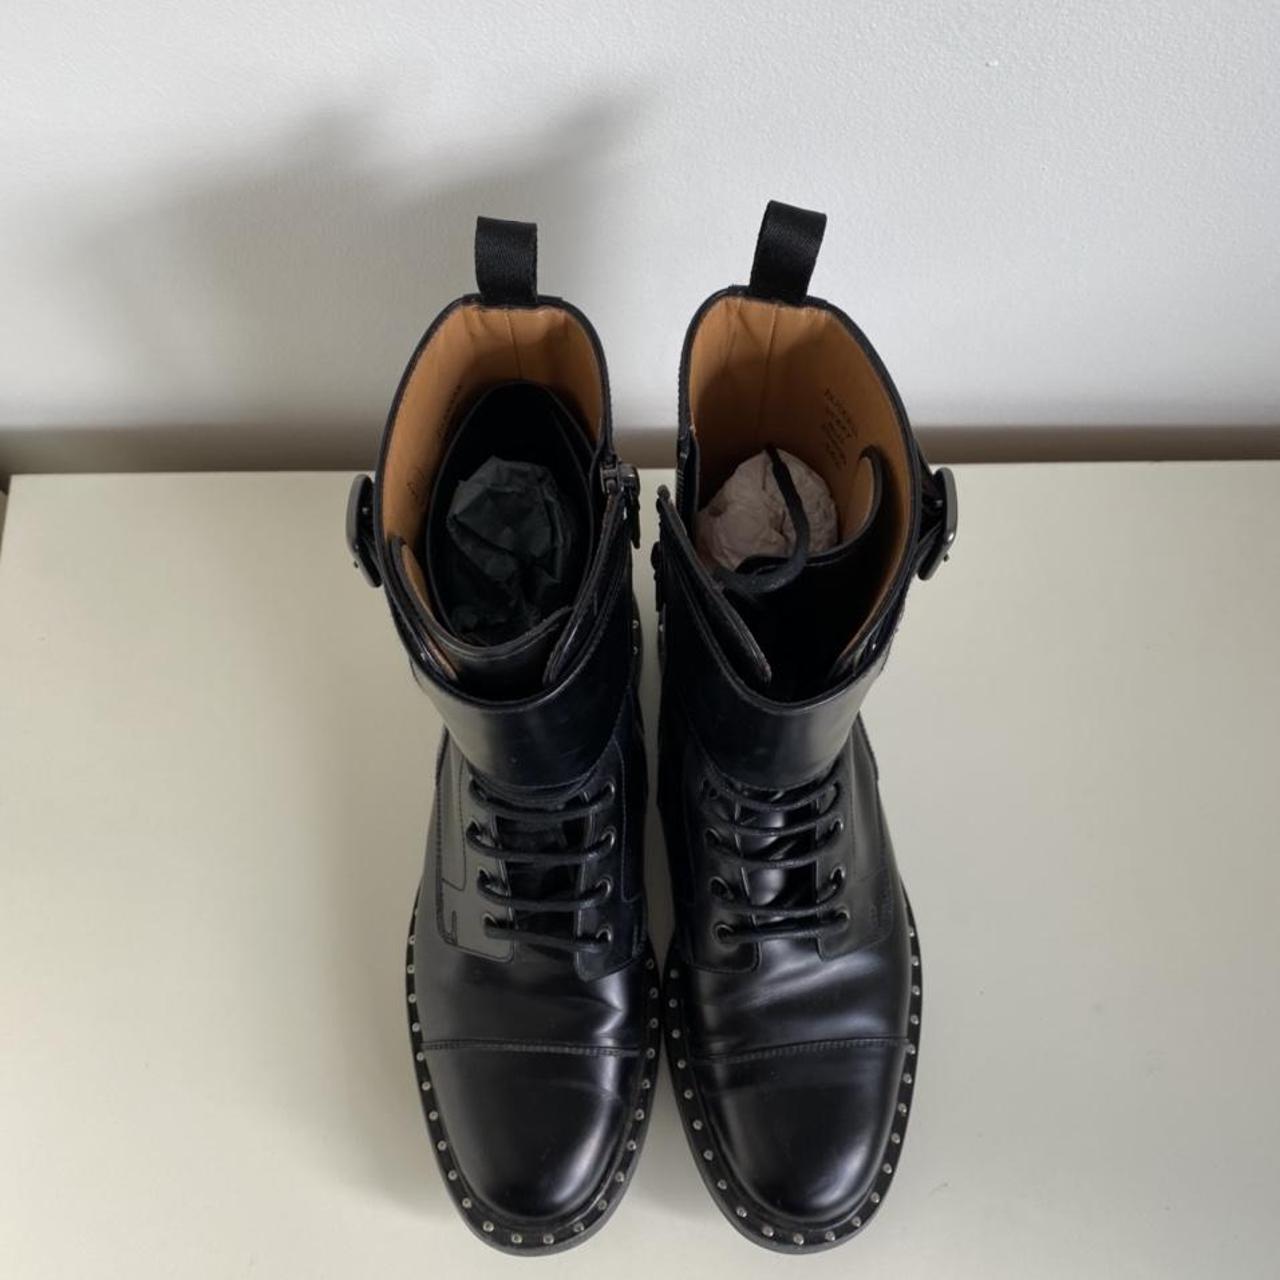 Church’s Stefy, front laced combat boots in black... - Depop